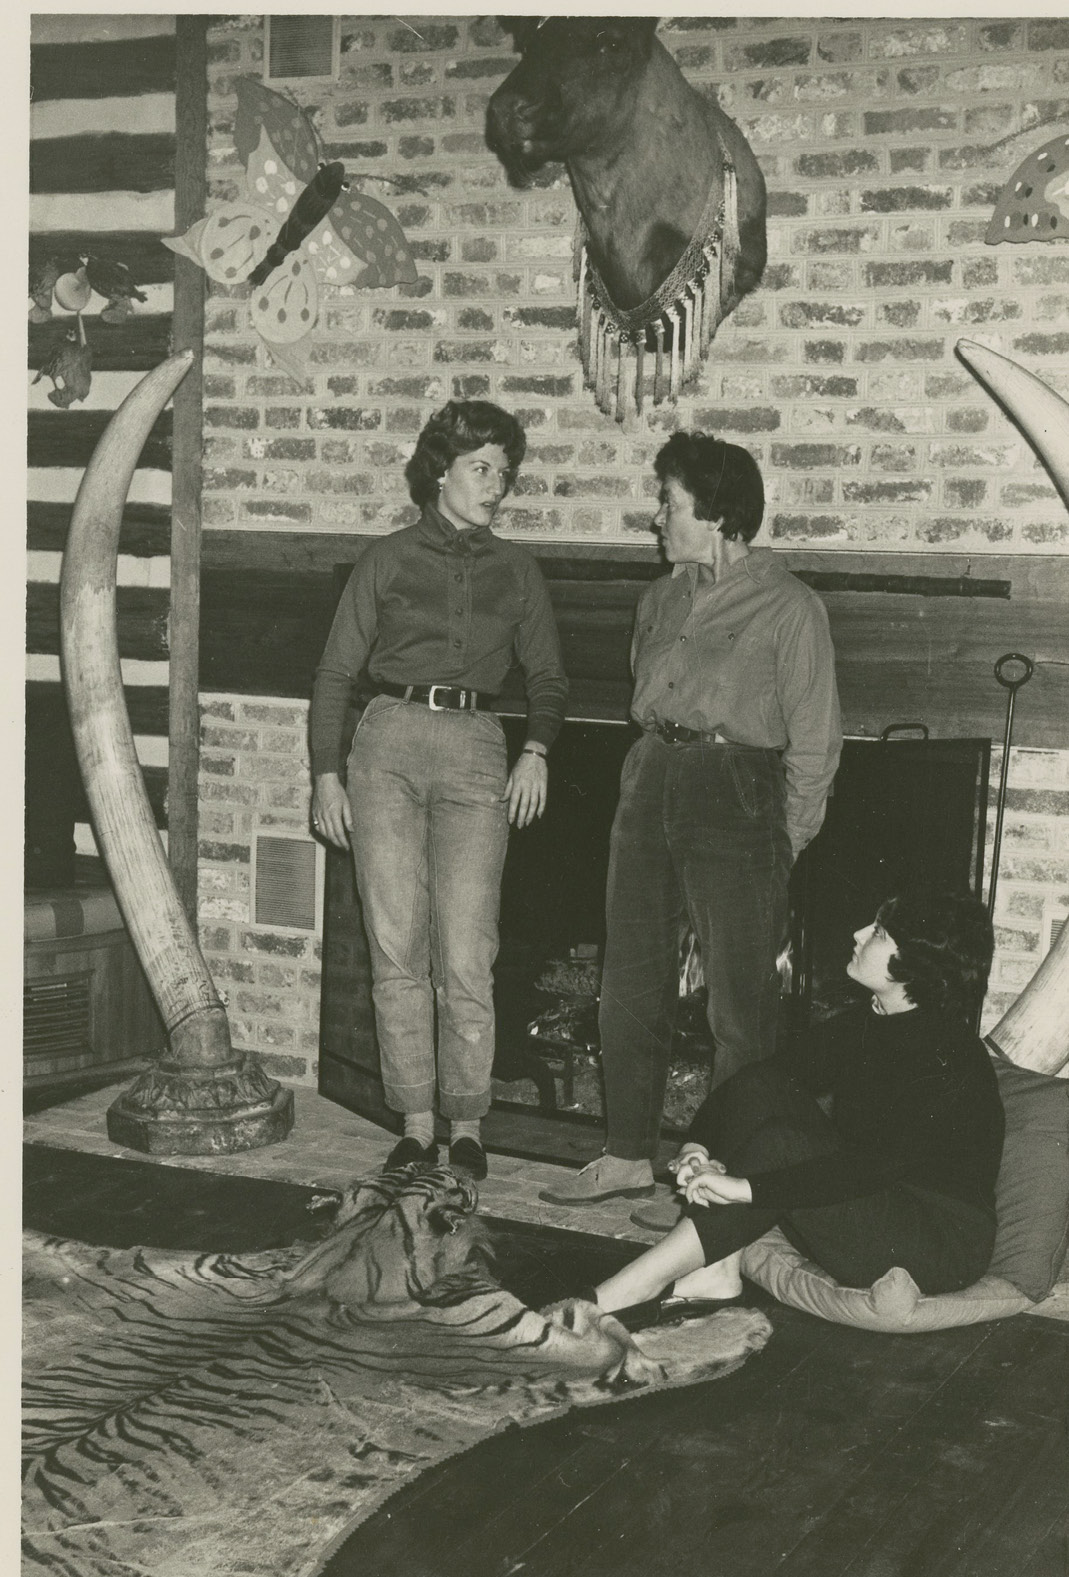 With daughters Landine and Bokara (seated) in Medway’s “Trophy Room,” undated